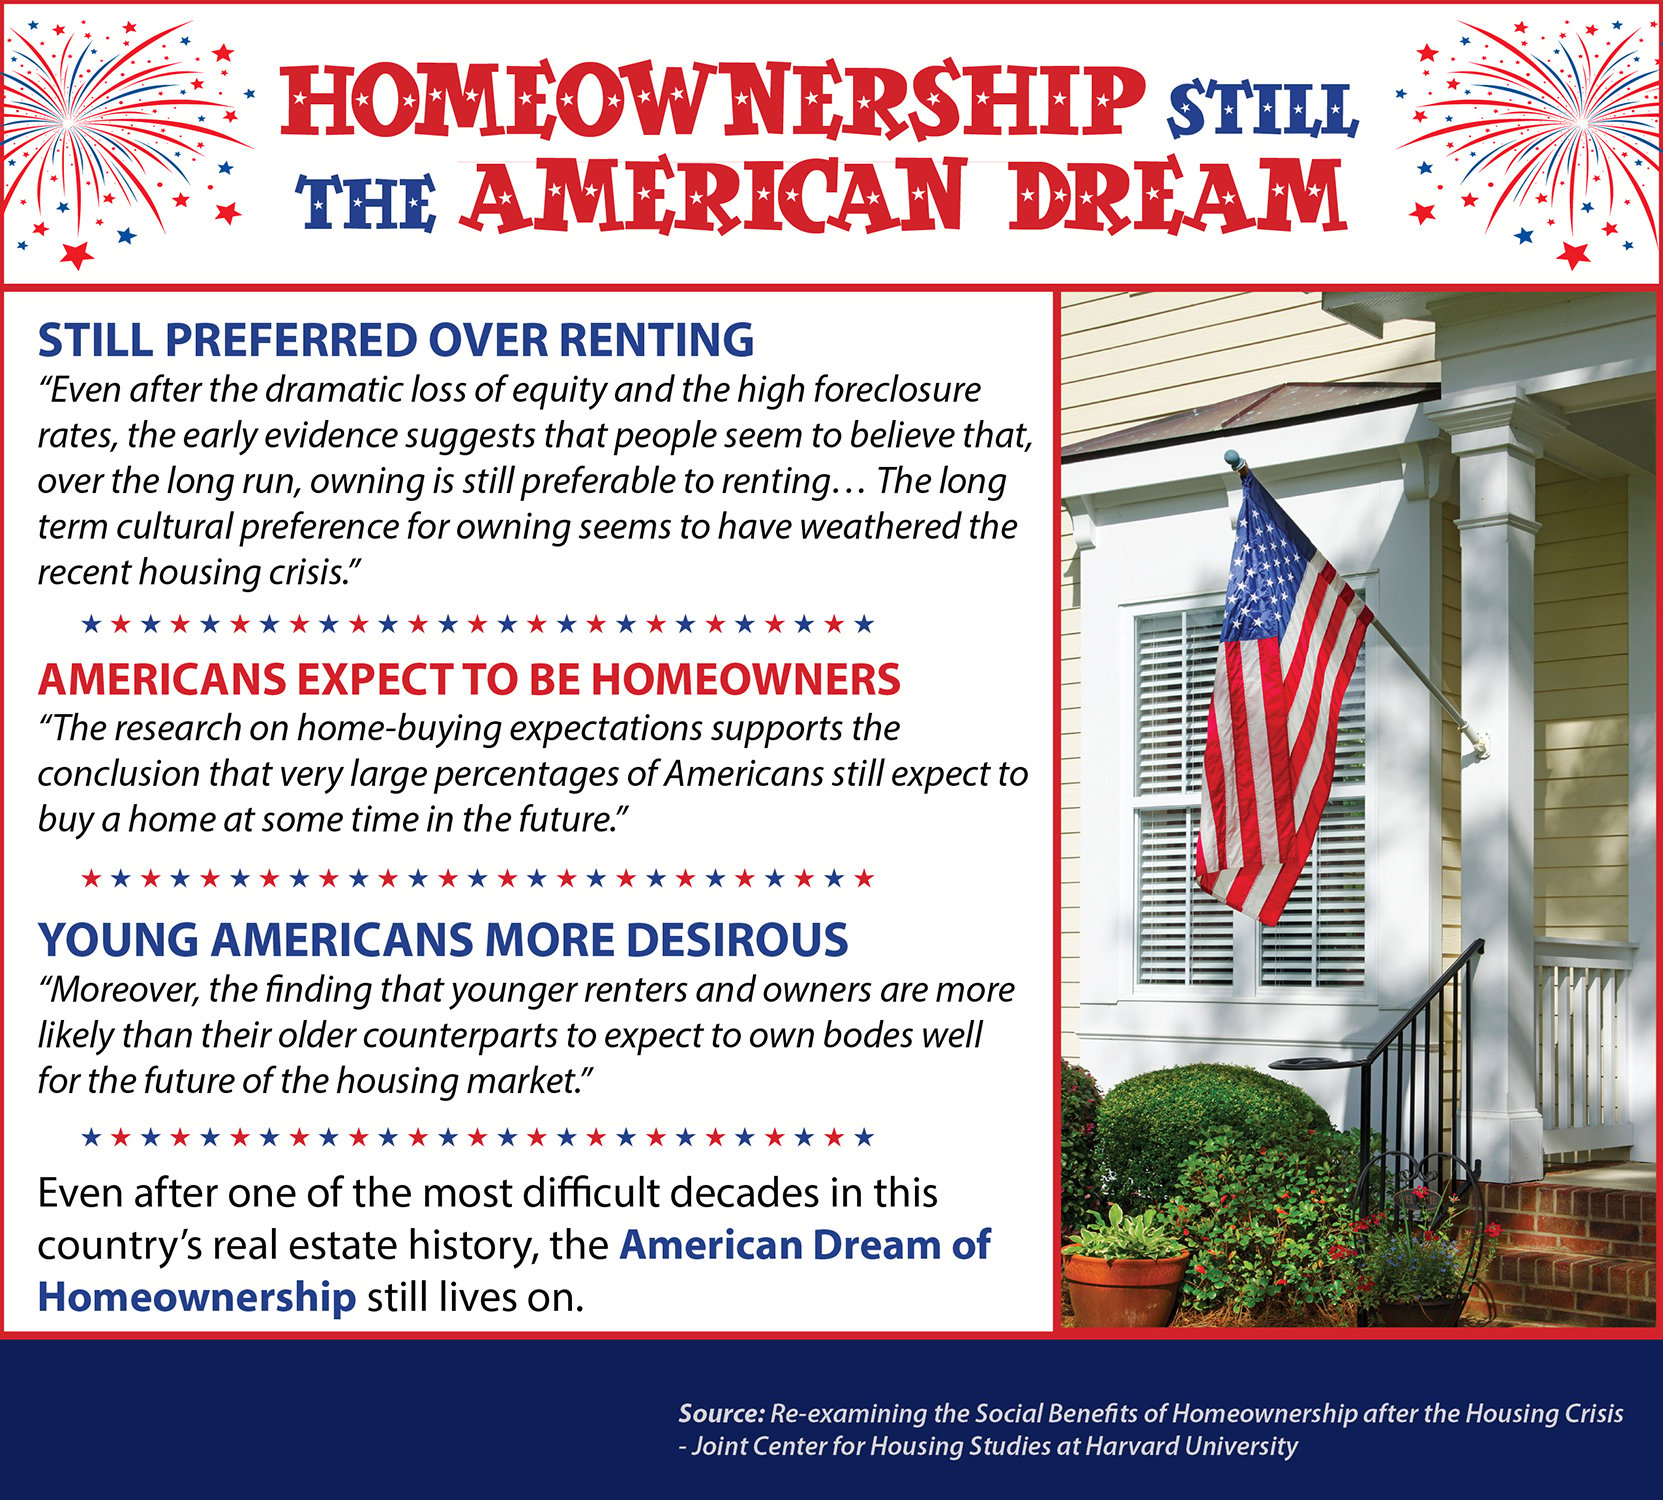 Homeownership Still The American Dream | Keeping Current Matters